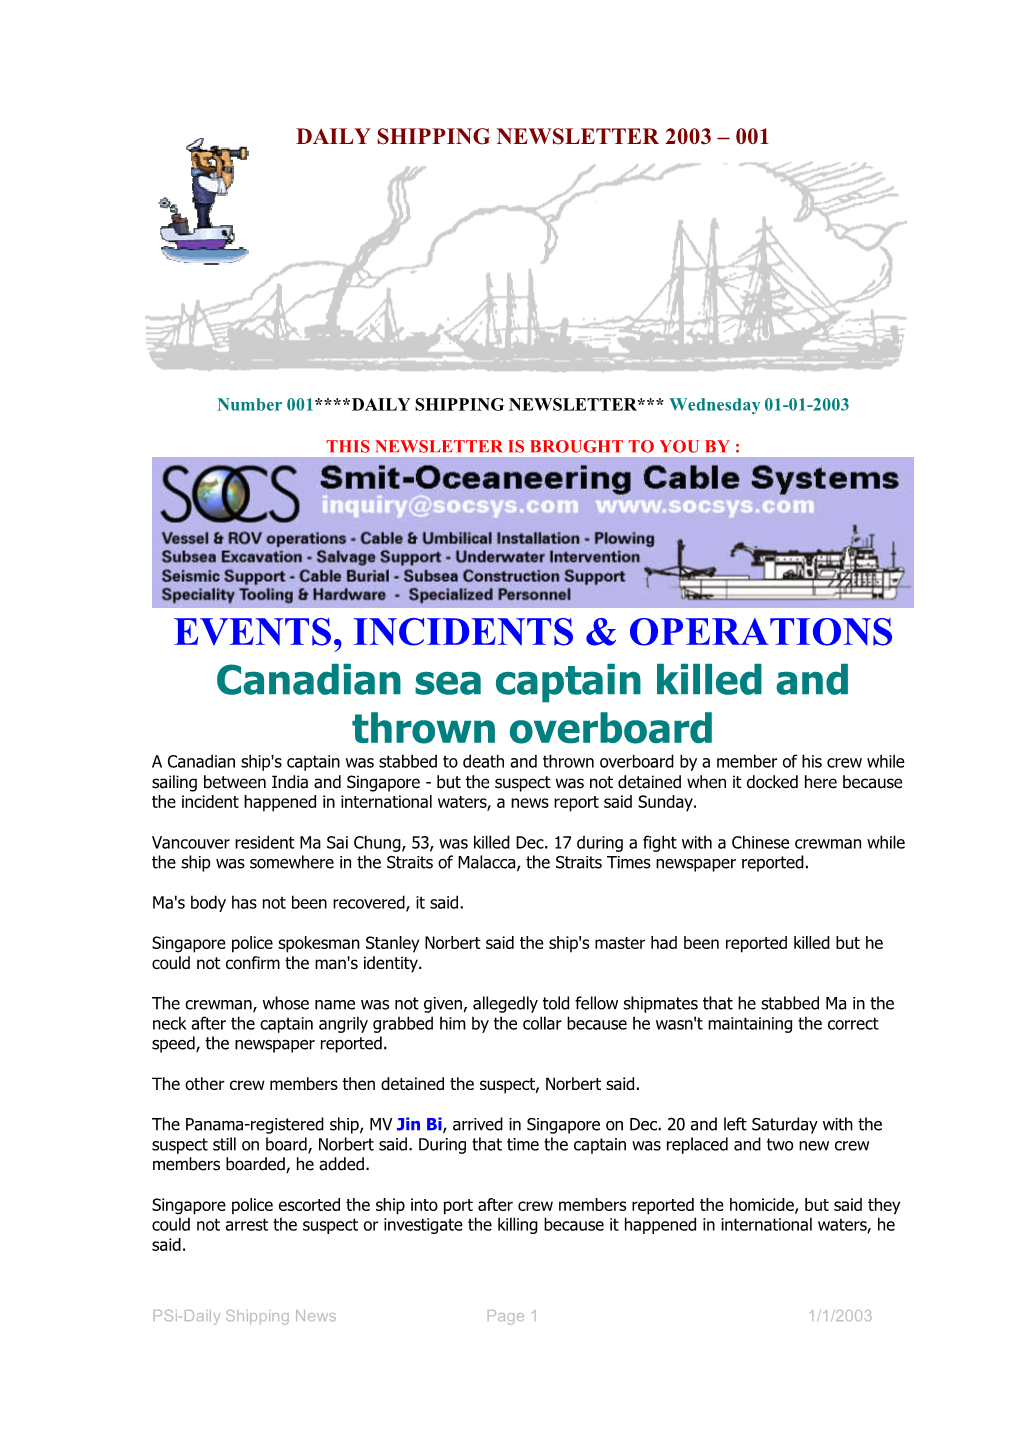 EVENTS, INCIDENTS & OPERATIONS Canadian Sea Captain Killed